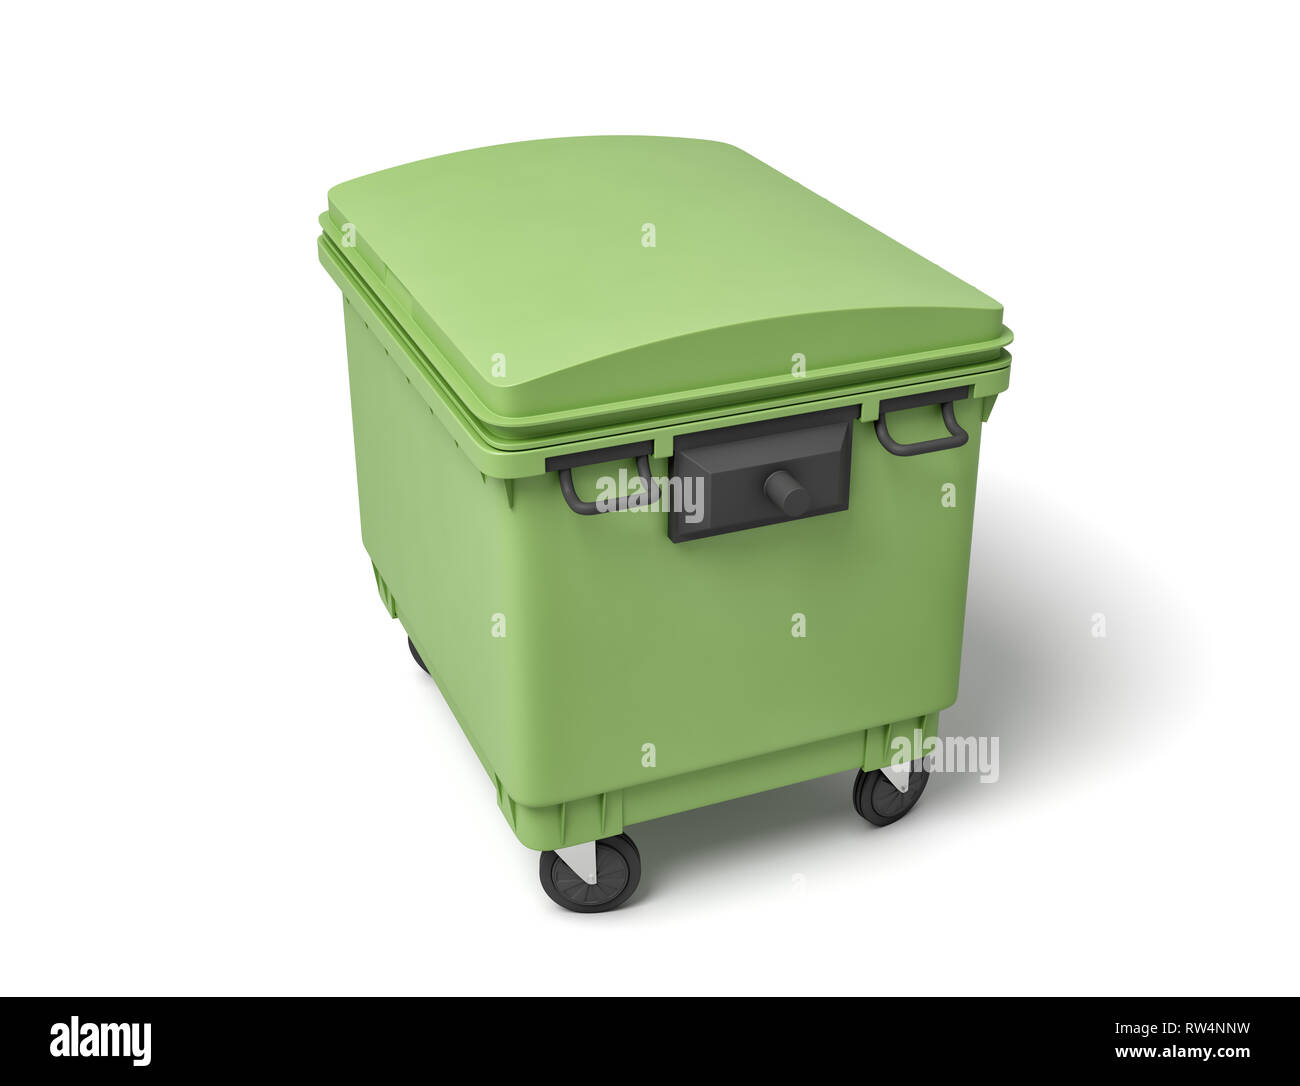 3d rendering of a light-green dumpster on white background. Stock Photo